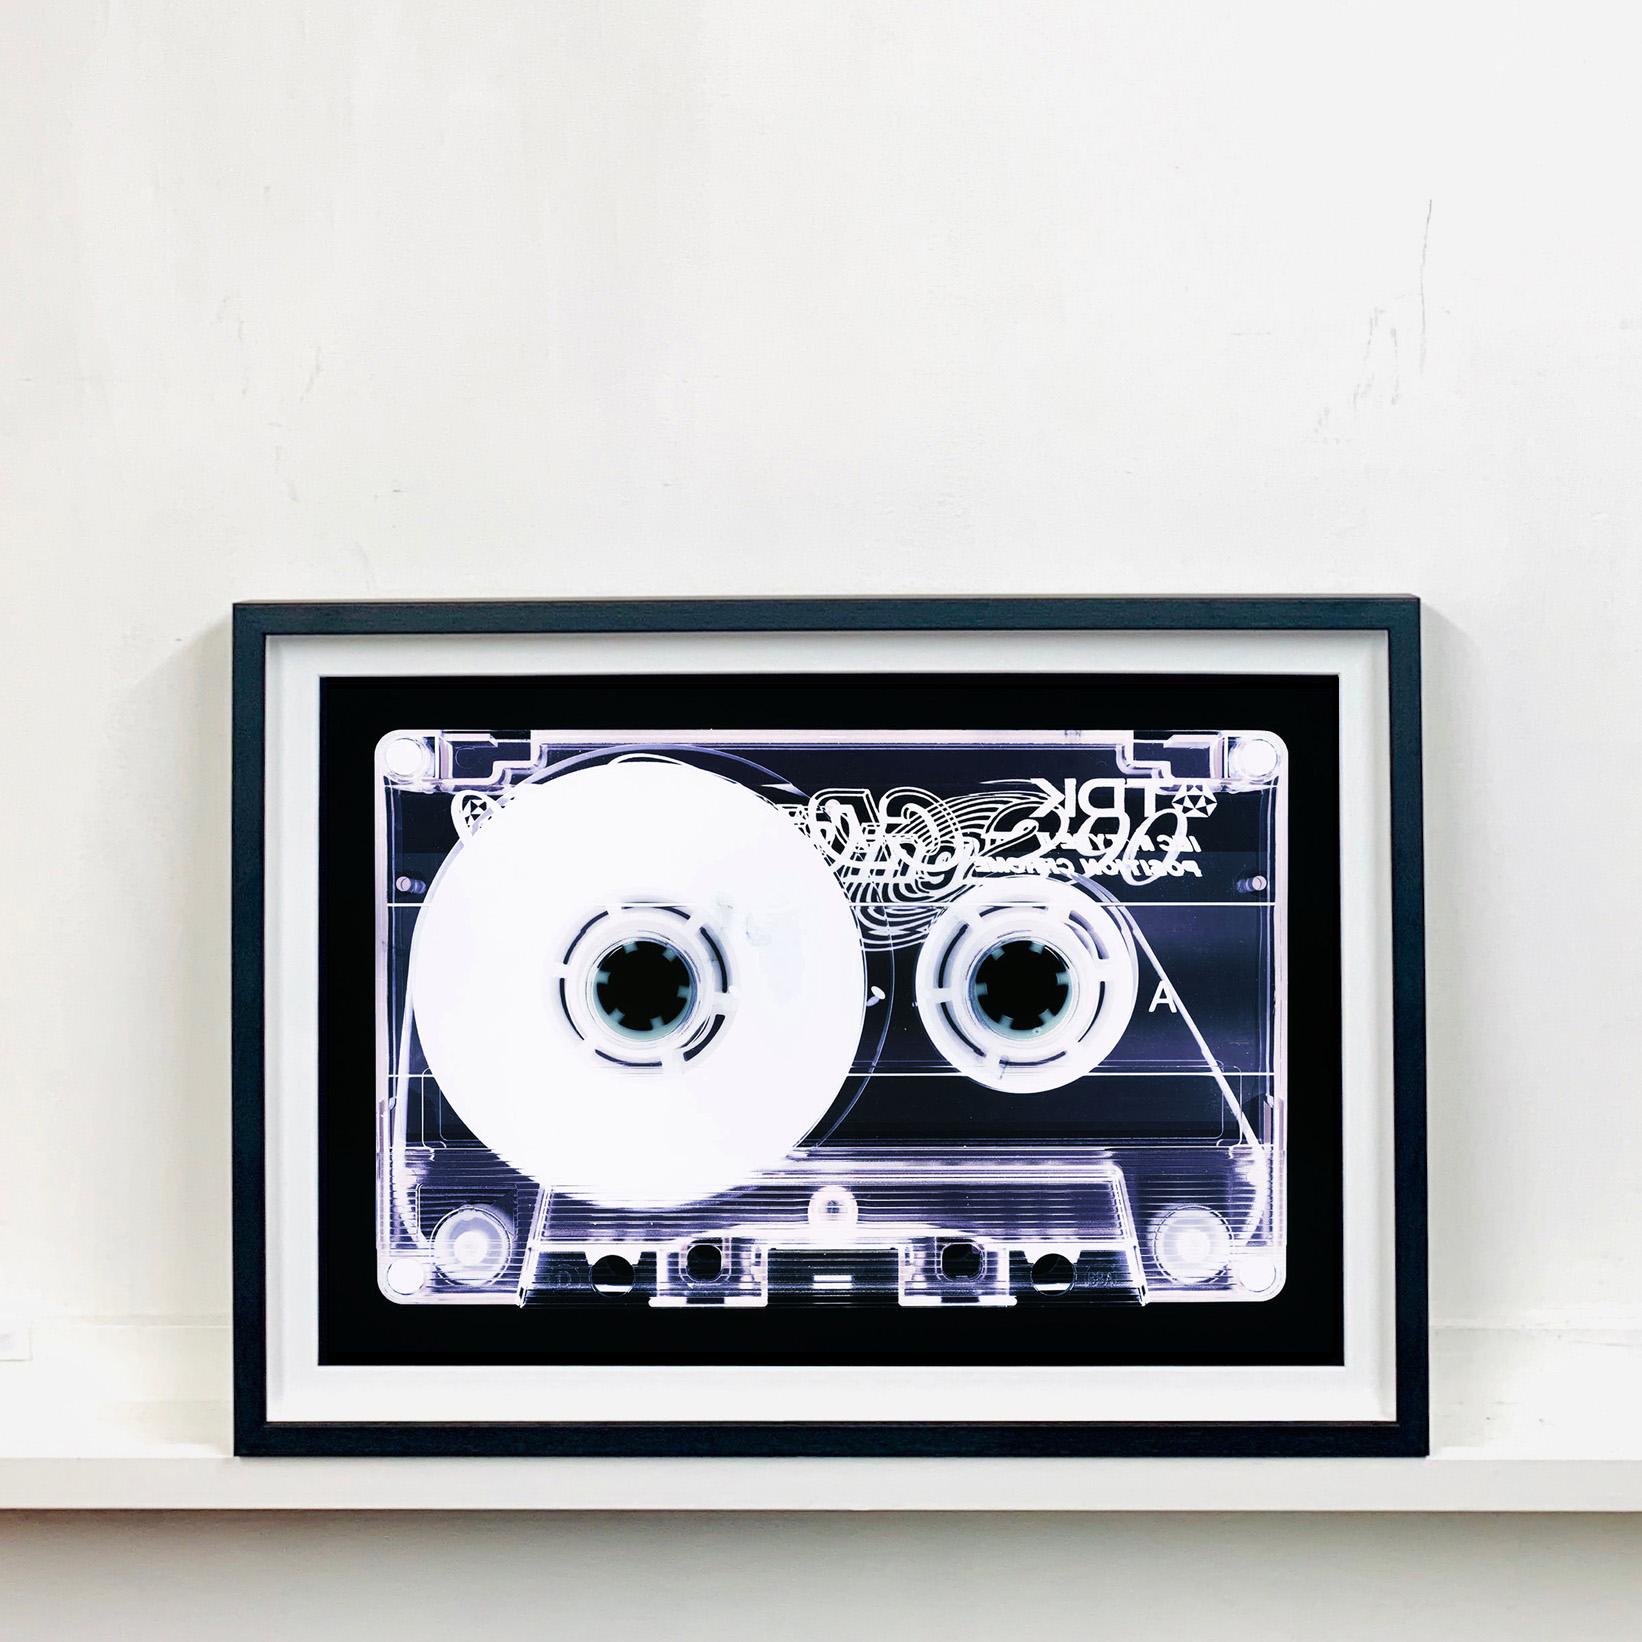 Tape Collection - Blank Tape Side A - Conceptual Color Music Art - Pop Art Photograph by Heidler & Heeps